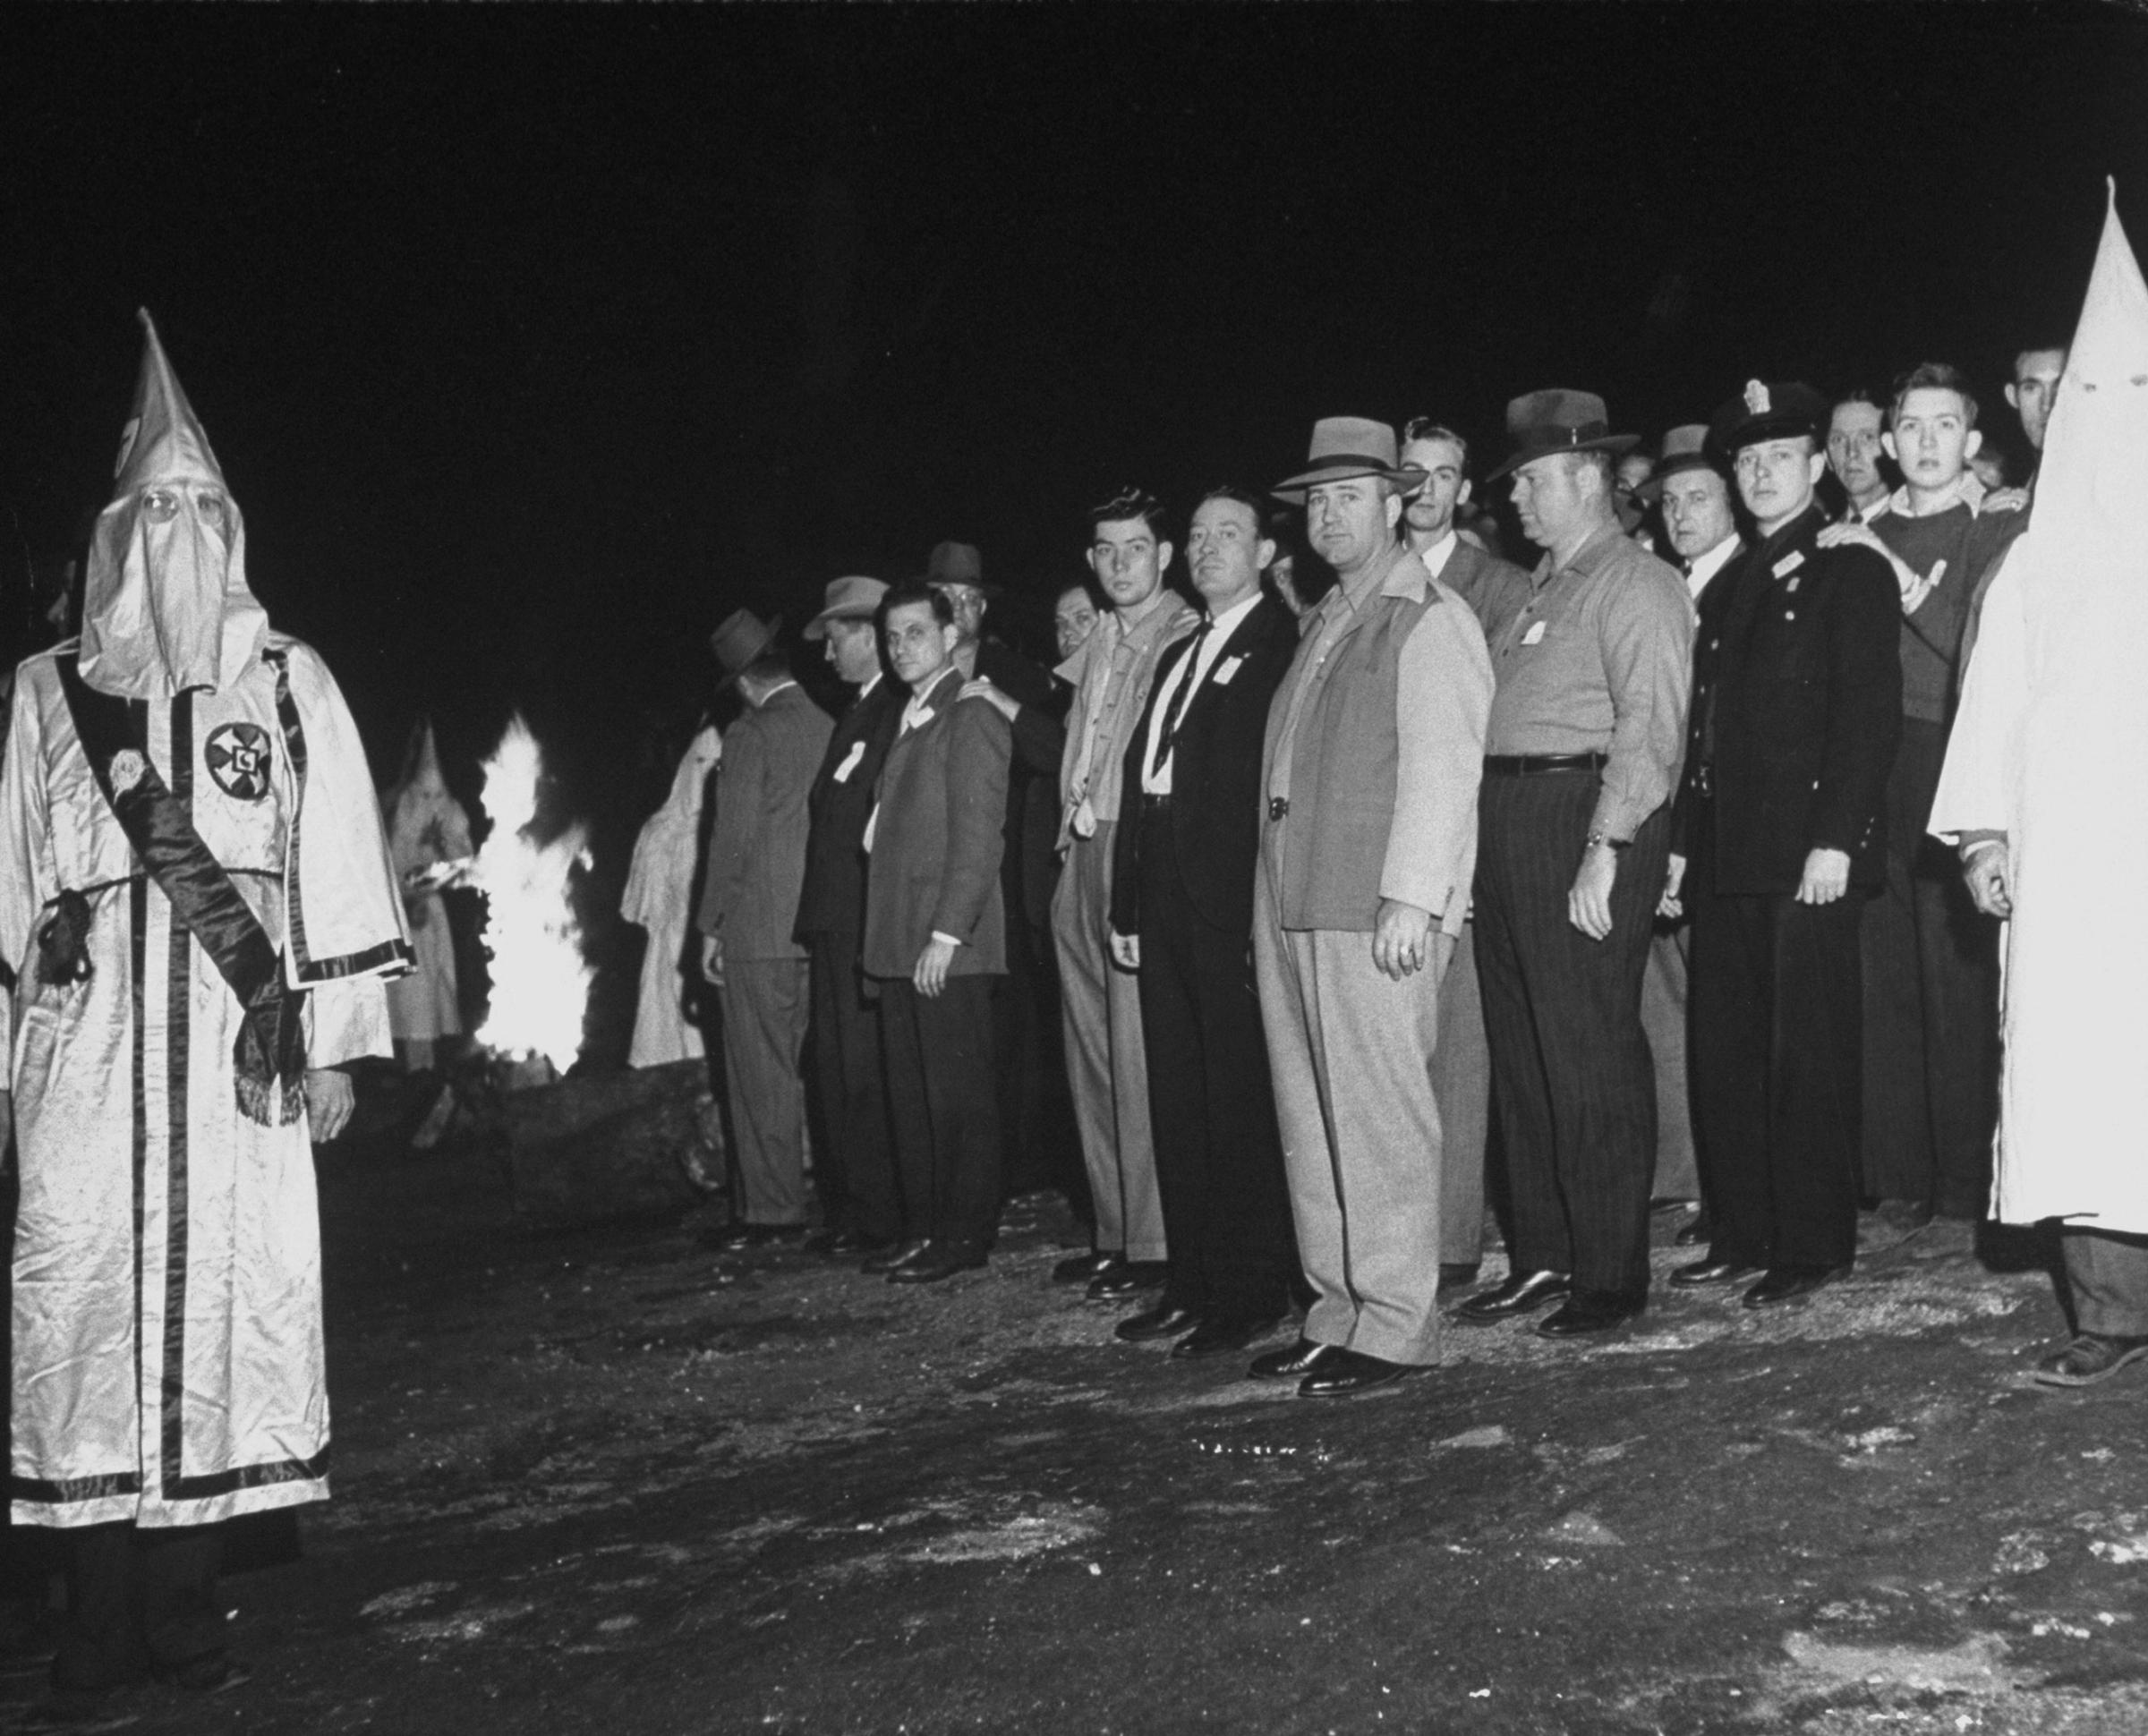 Klan initiates (including some Atlanta policemen) stand before a burning cross during a ritual in Georgia, 1946.